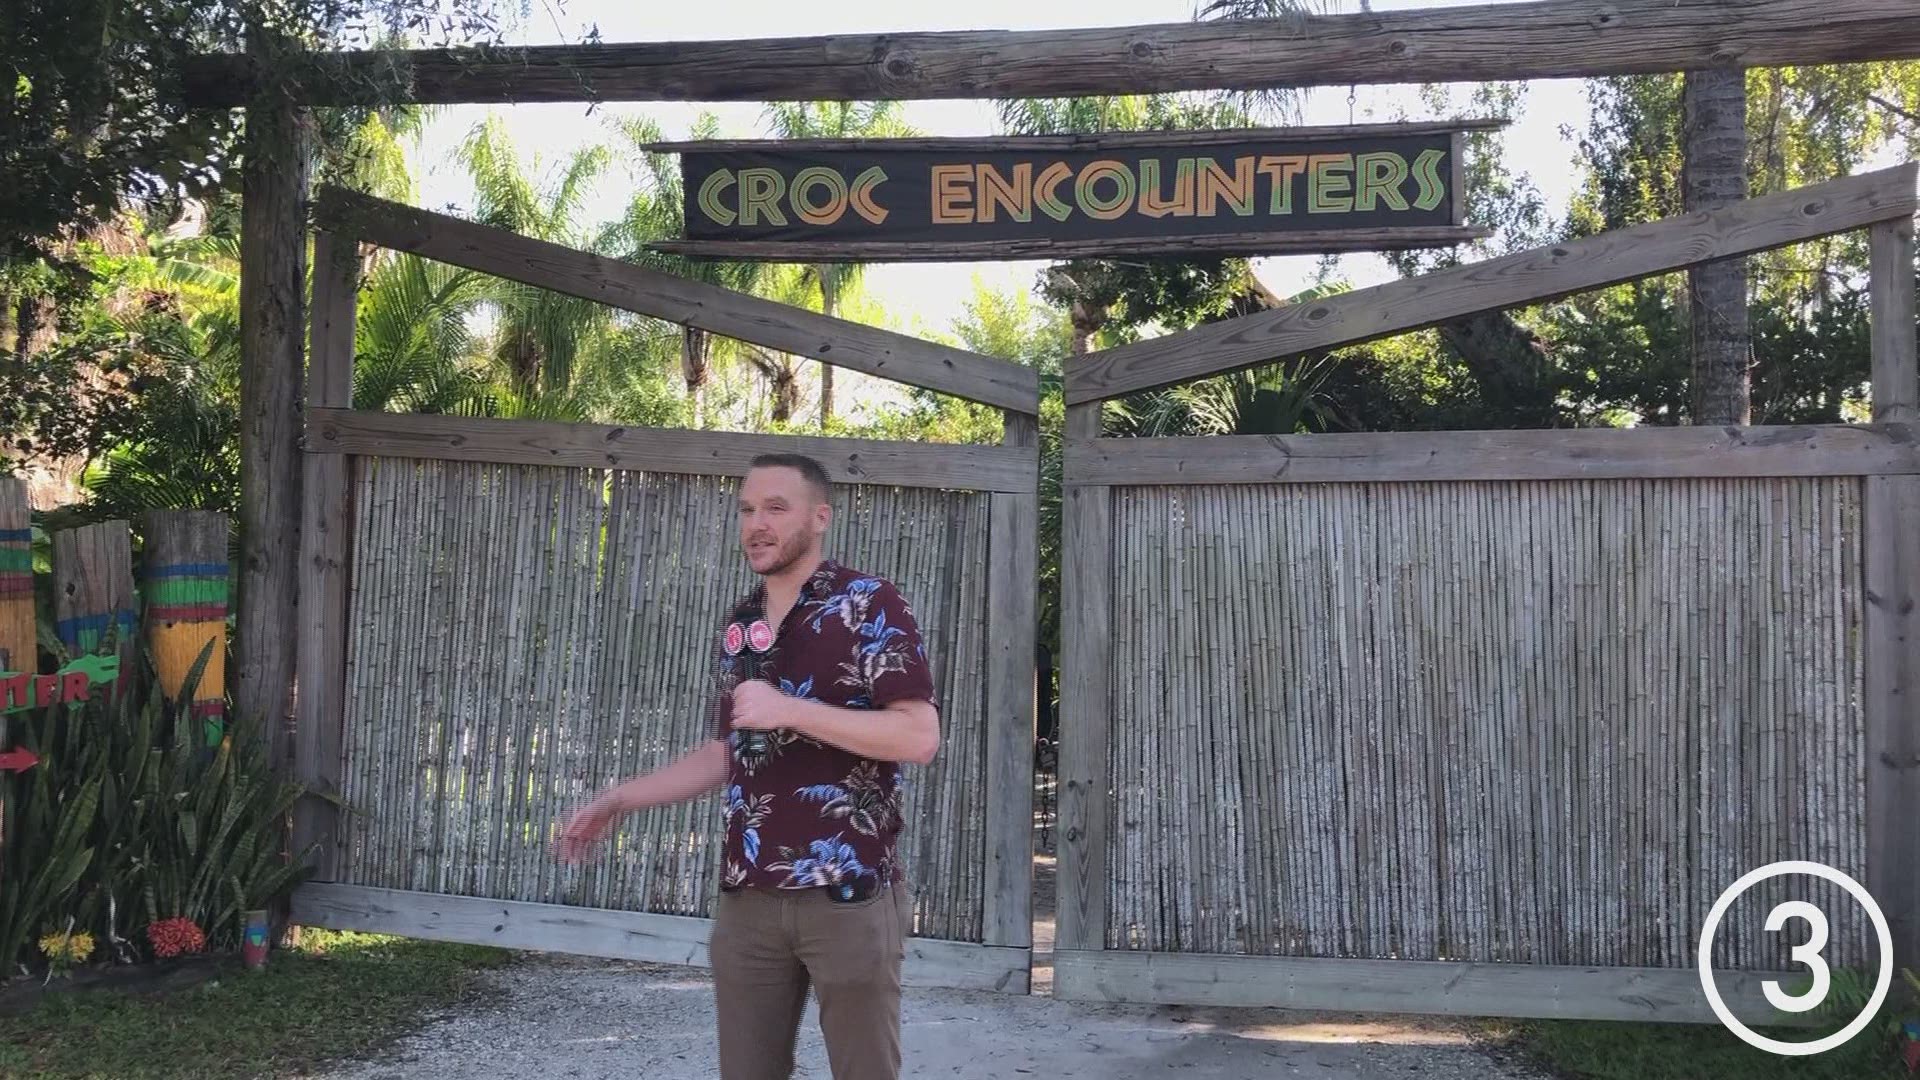 Mike Polk Jr. makes his first stop during his day trip to Florida. We'll soon find out how many crocs are at the Croc Encounter.